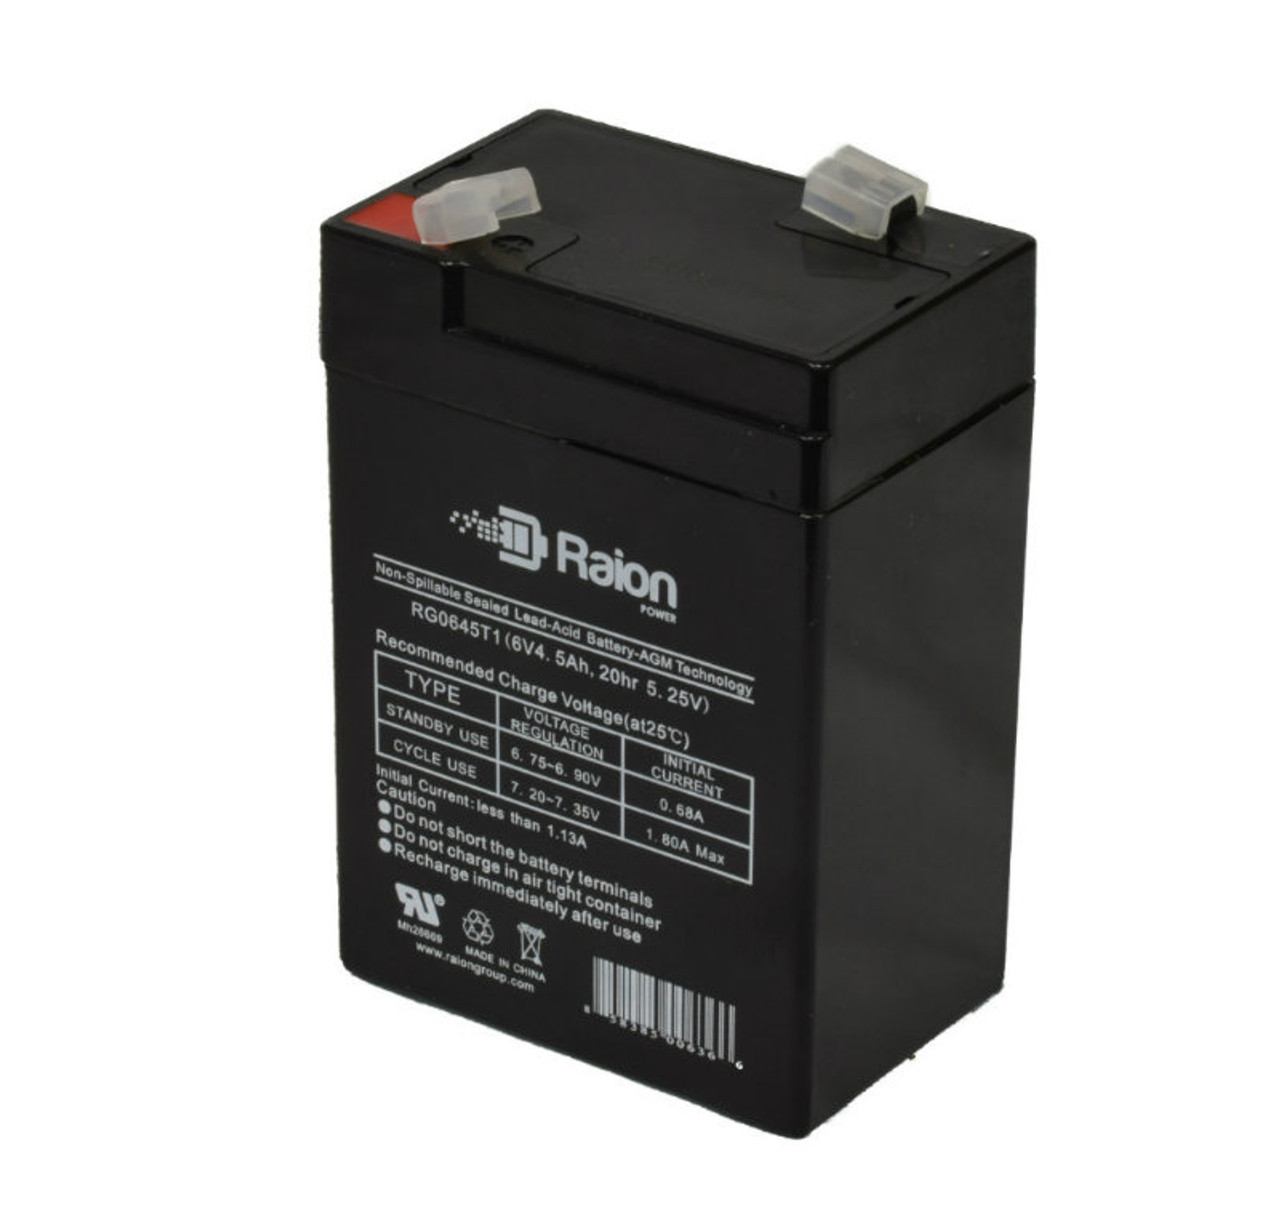 Raion Power RG0645T1 6V 4.5Ah Replacement Battery Cartridge for Chloride CSU4